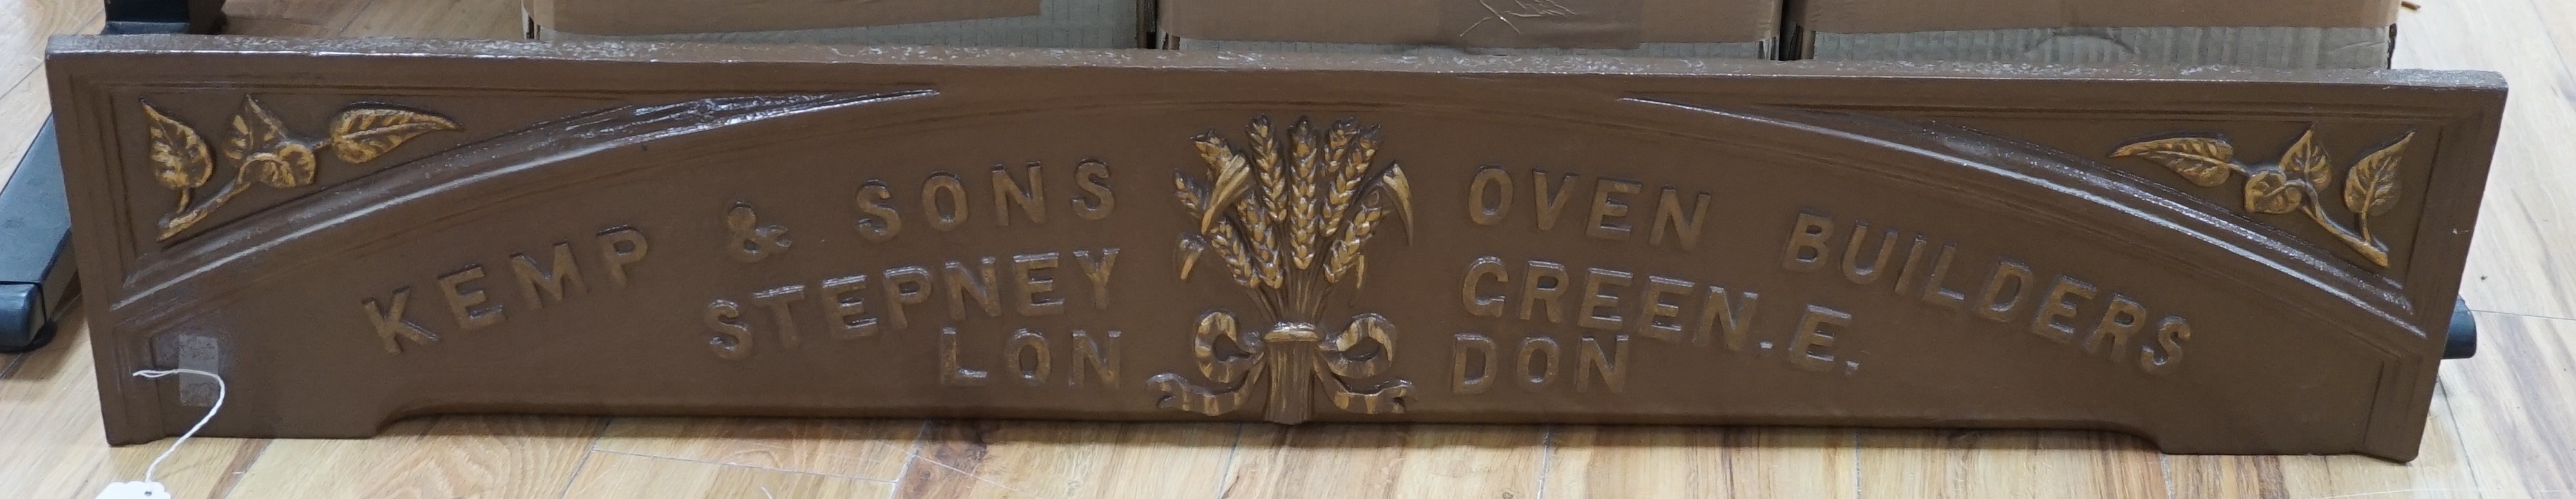 A Kemp & sons, oven builders, Stepney Green, London, cast iron advertising standing panel, 118 cms wide